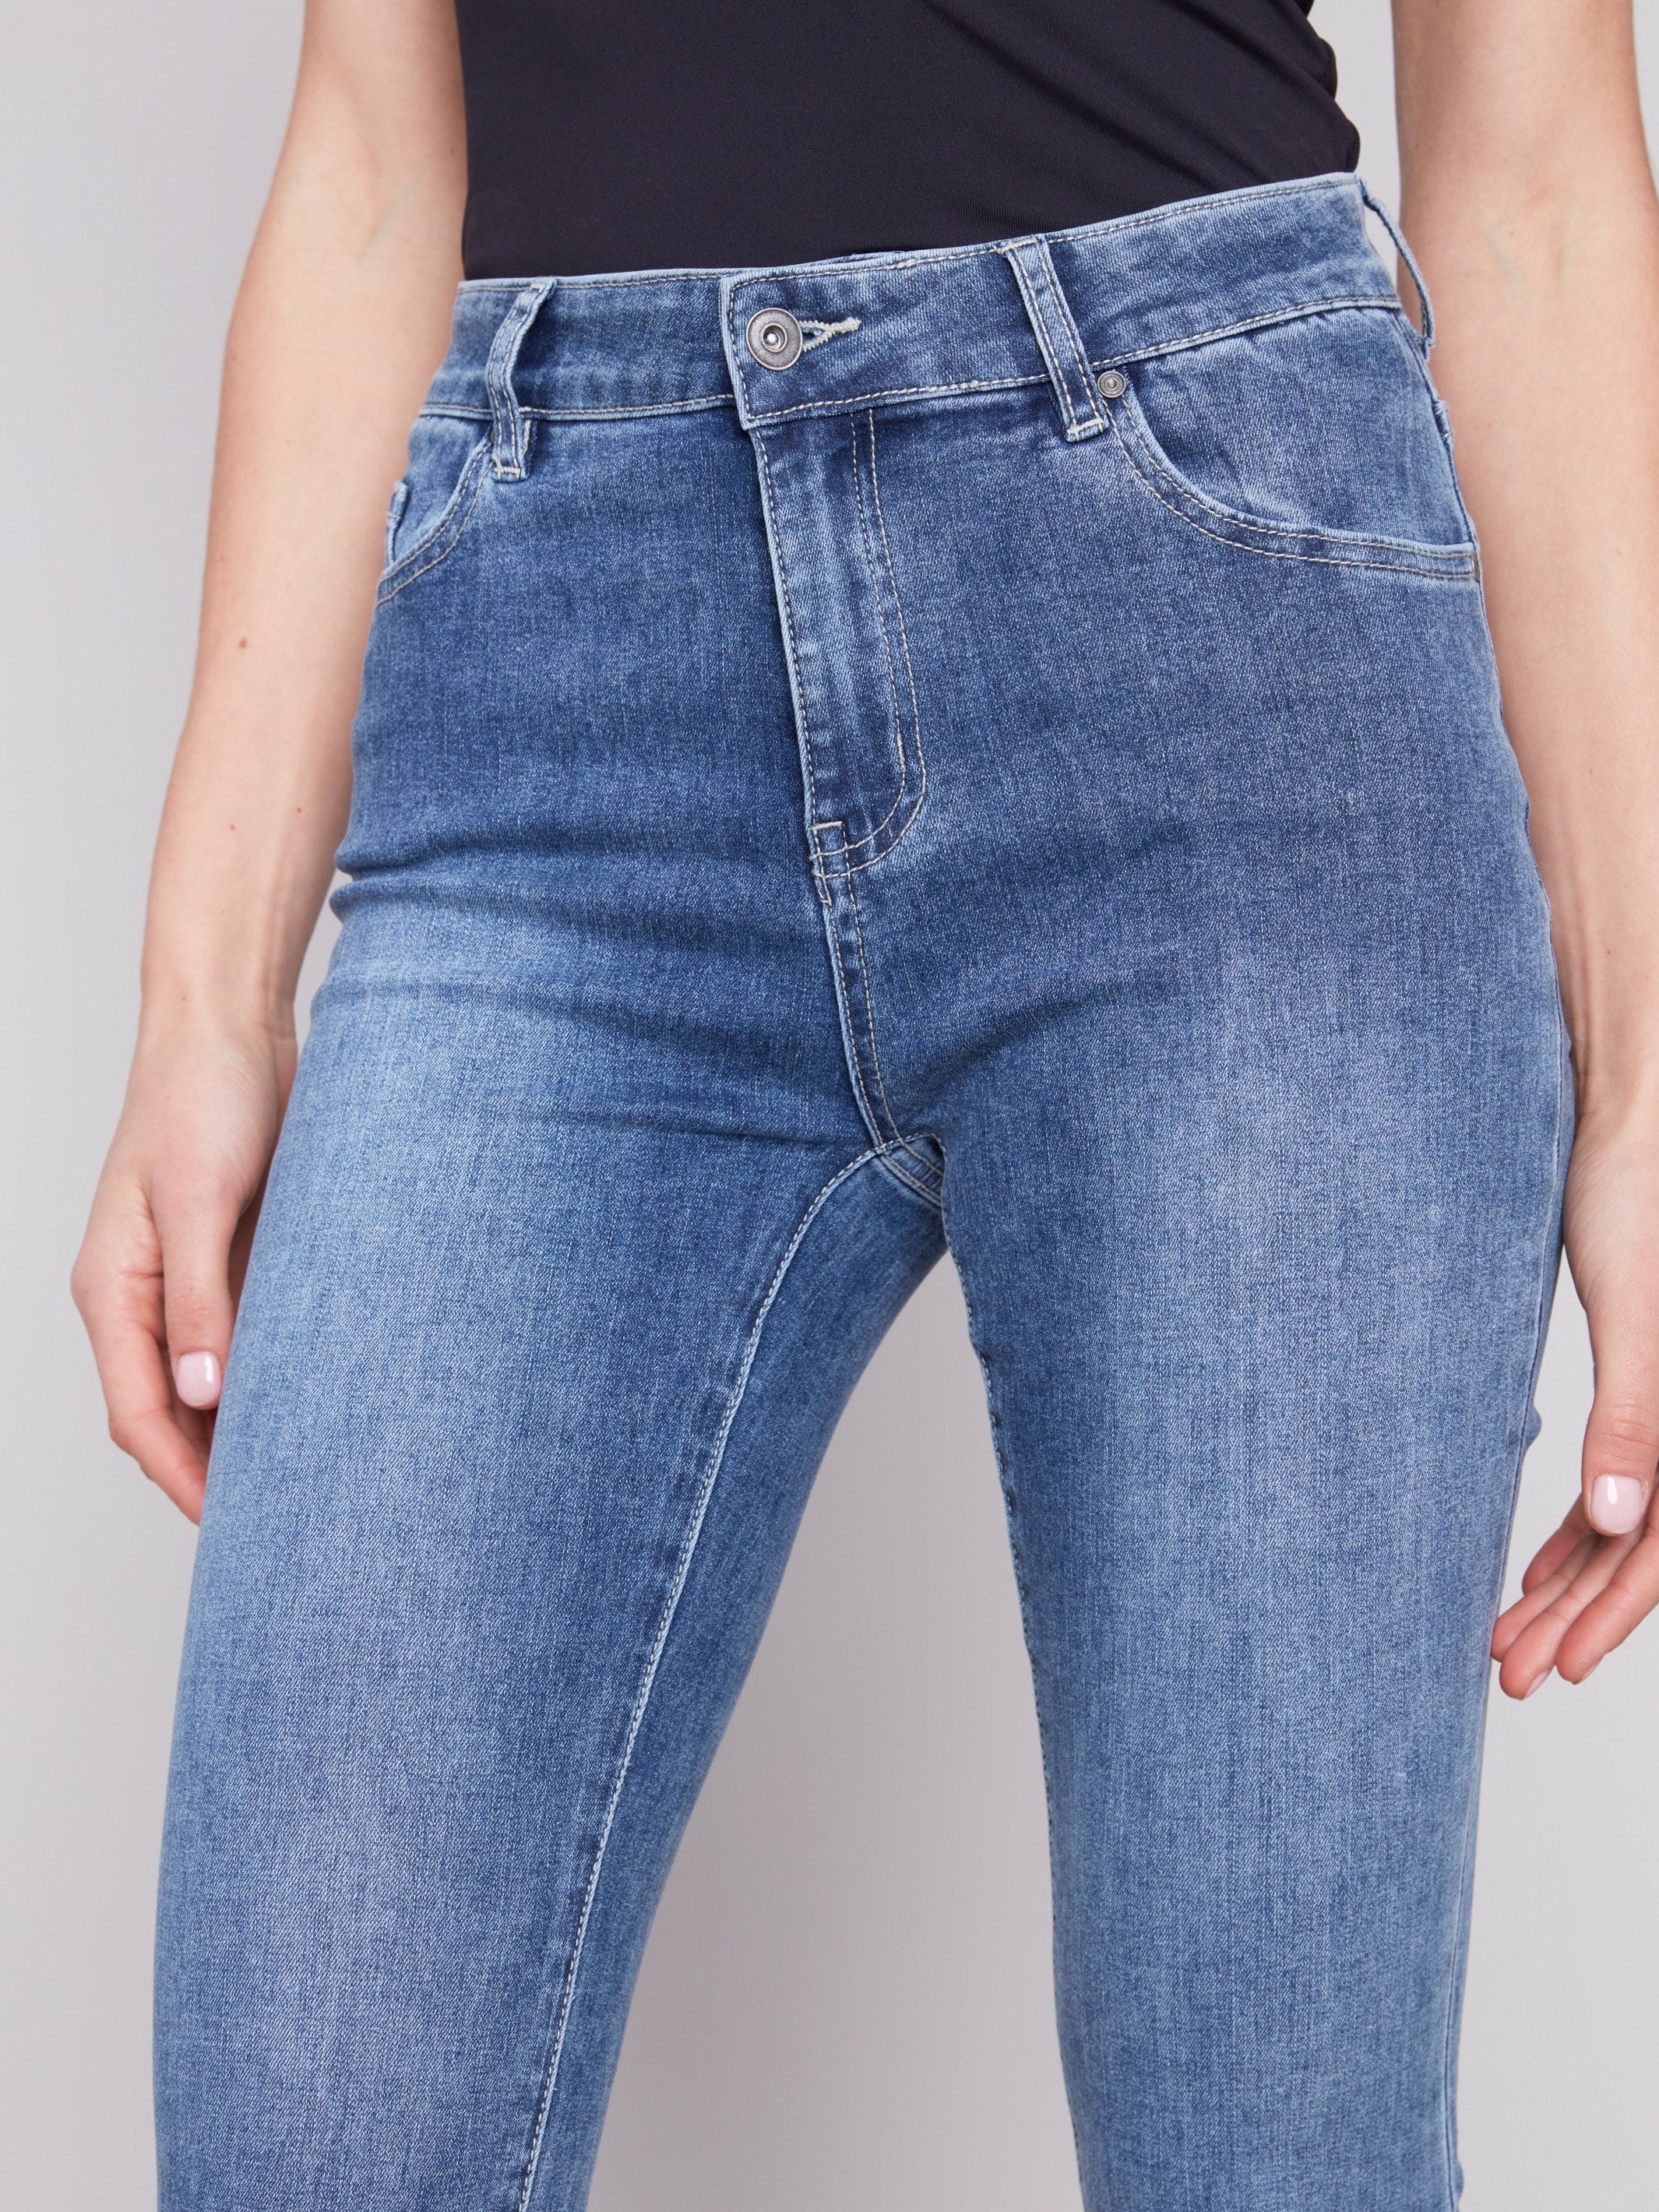 Cropped Bootcut Jeans with Asymmetrical Hem - Medium Blue - Charlie B Collection Canada - Image 5